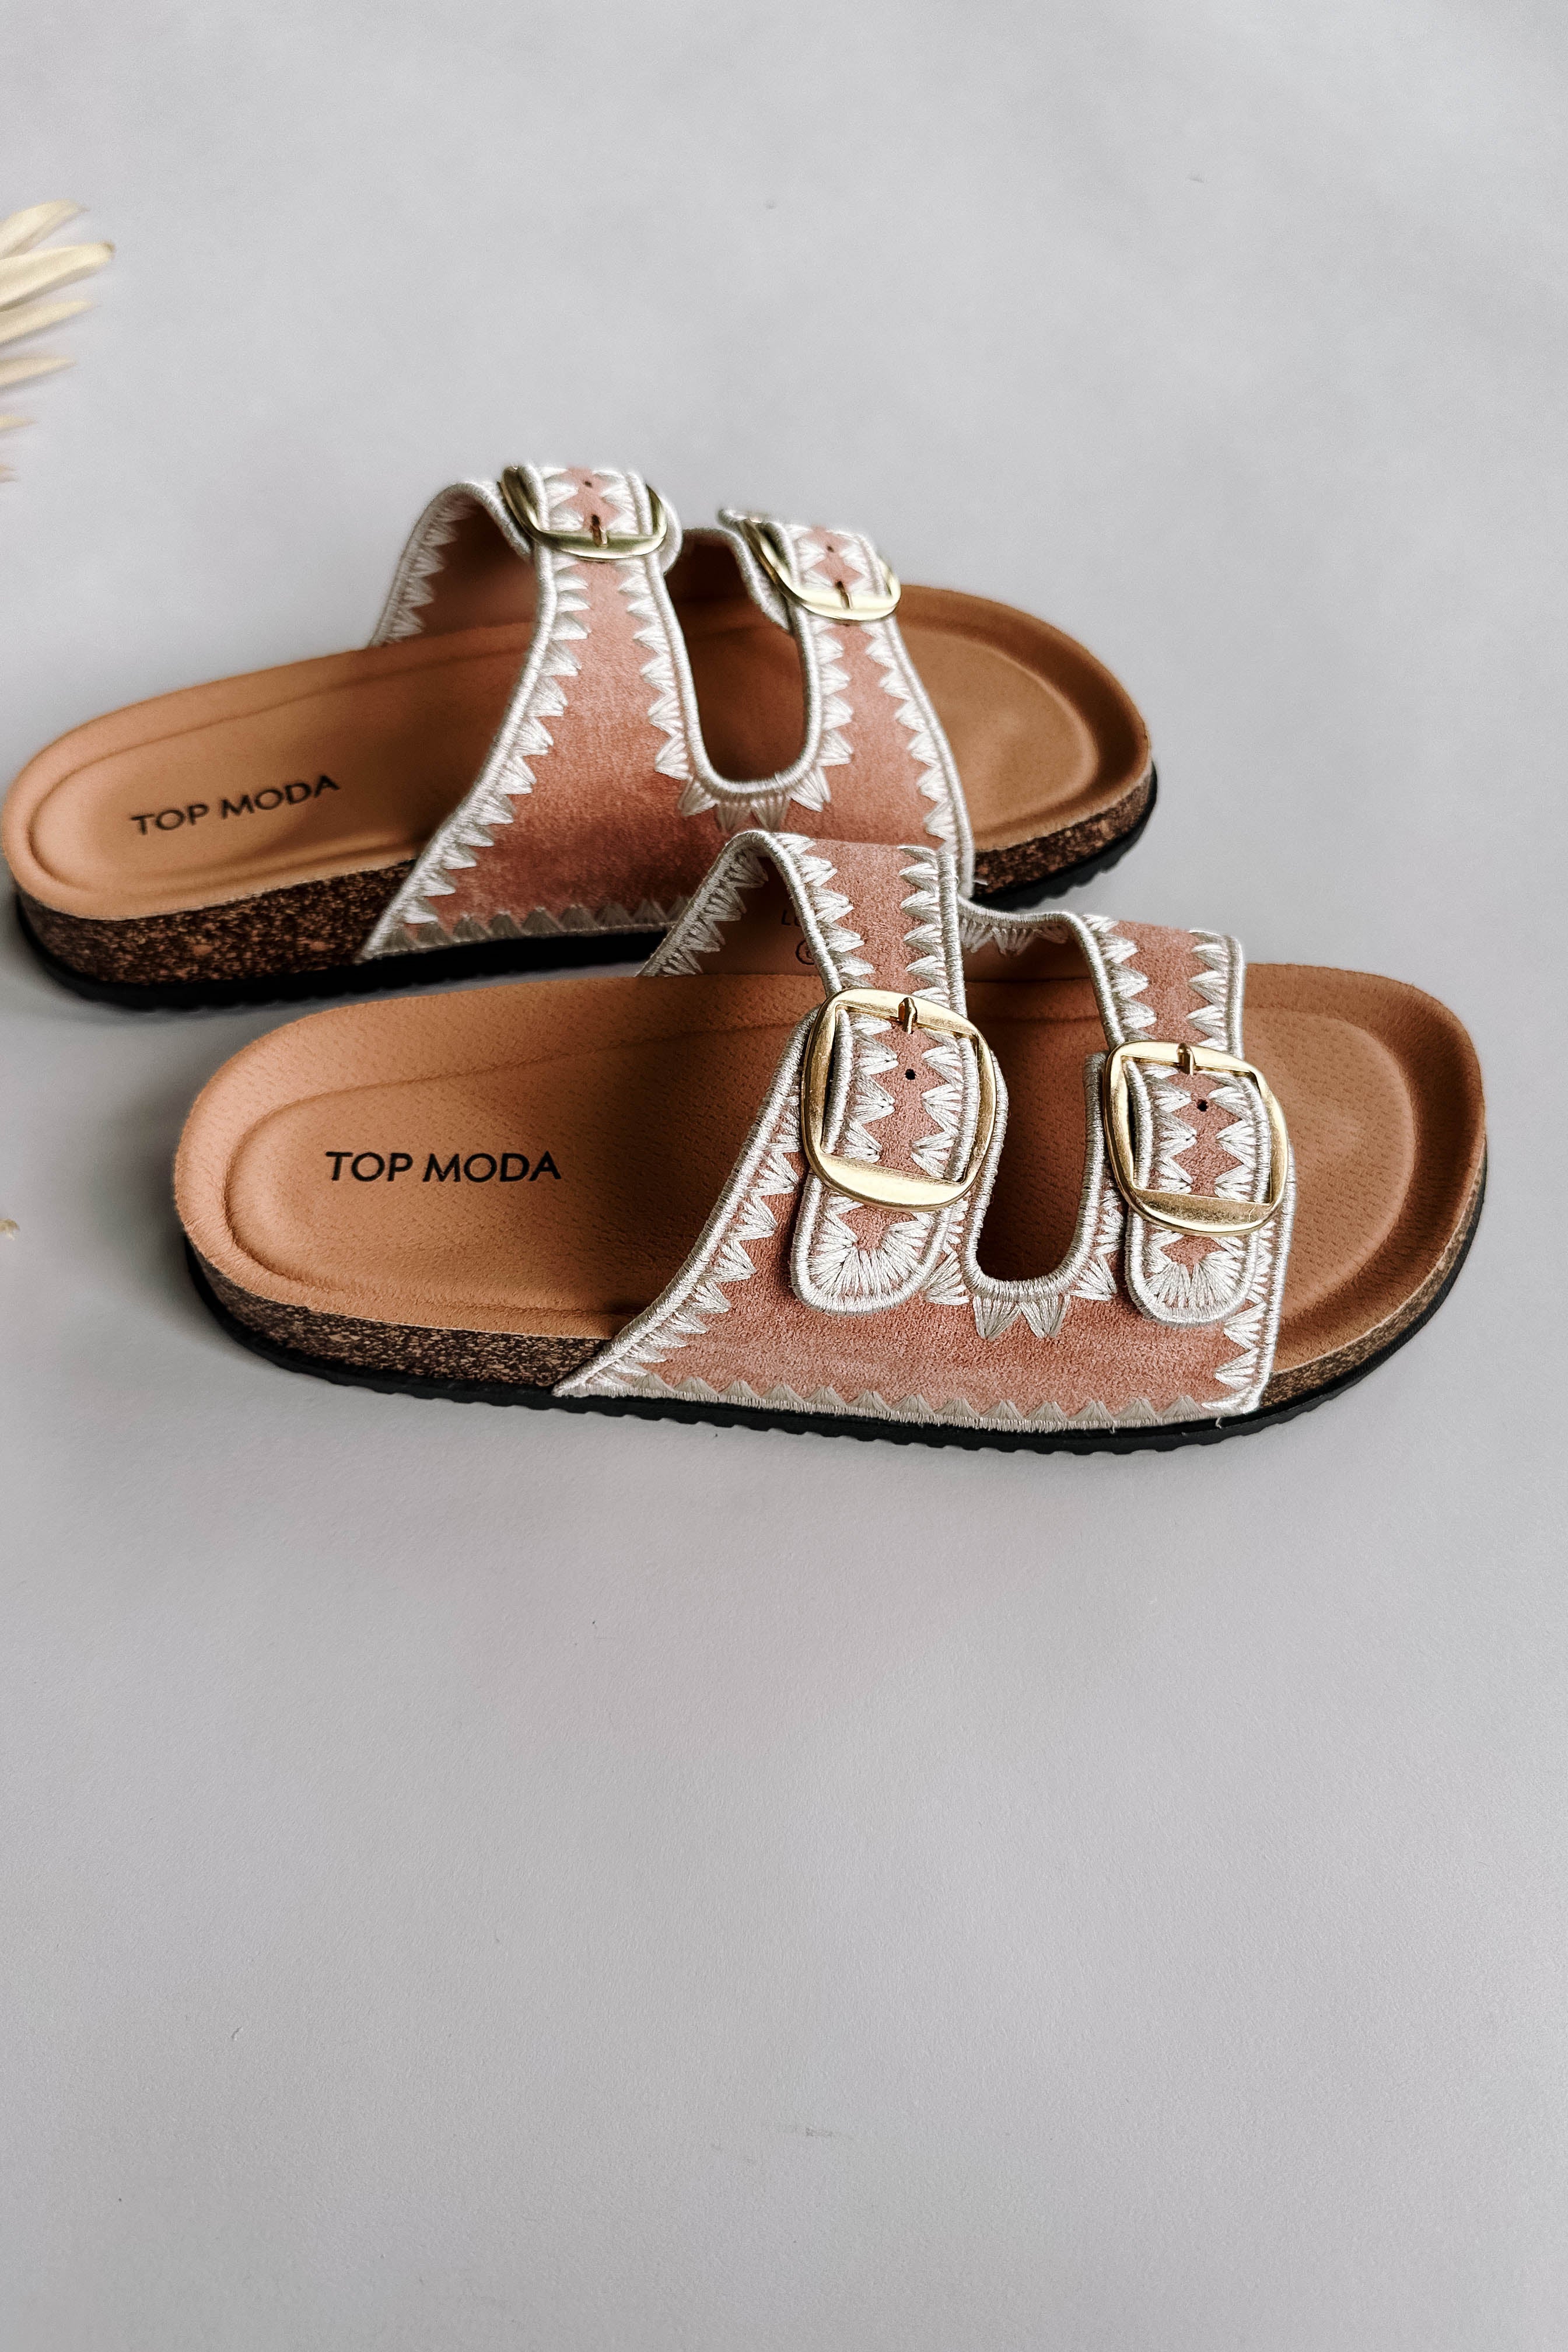 Side view of the Luca Sandal in Blush which features blush fabric, cream geometric trim design, two adjustable straps, gold buckles and slide-on style.